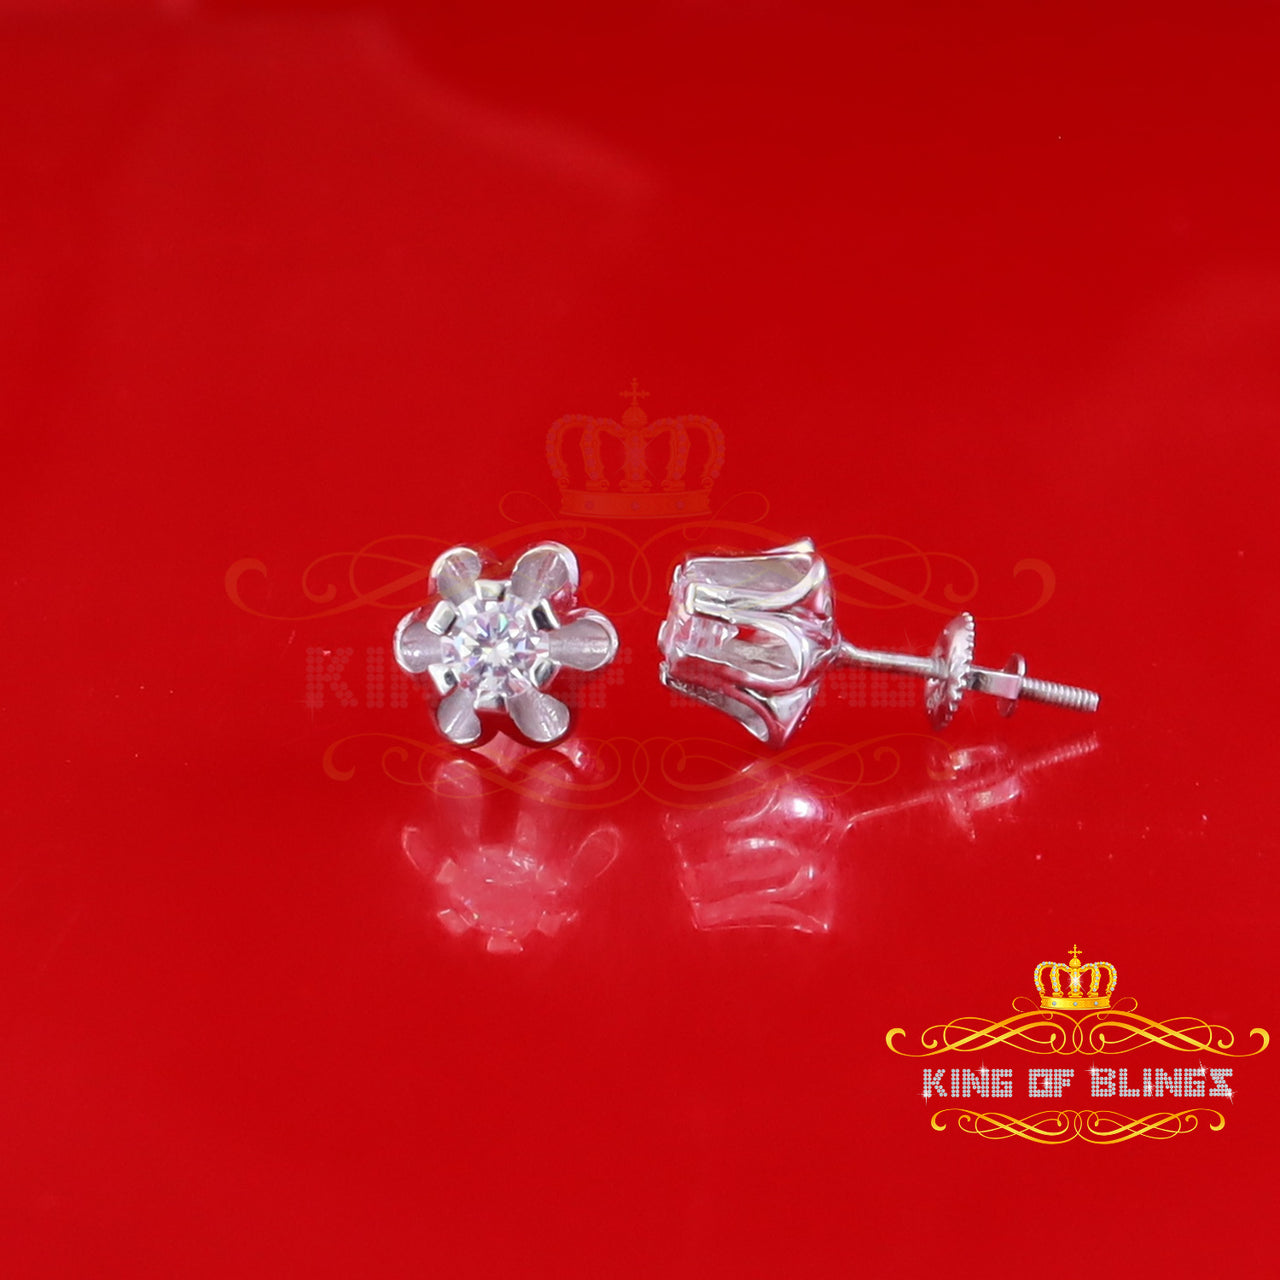 King of Bling's Women's 925 yellow silver ButterCup stud earrings with 0.50ct VVS 'D' Moissanite